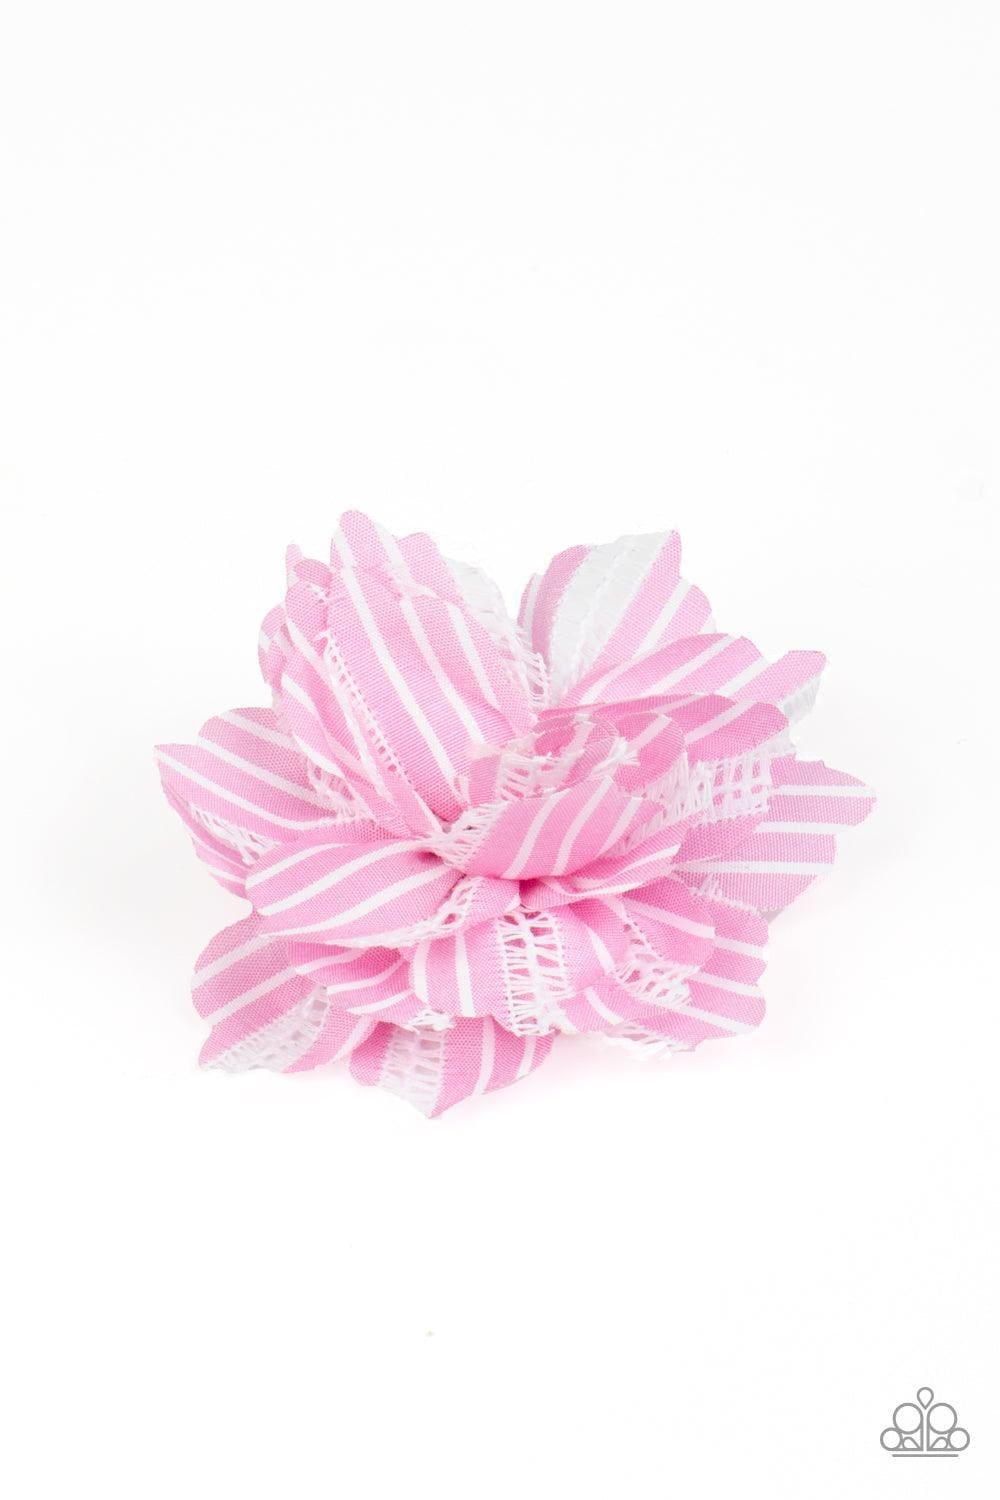 Paparazzi Accessories - Stripe For The Picking - Pink Hair Clip - Bling by JessieK